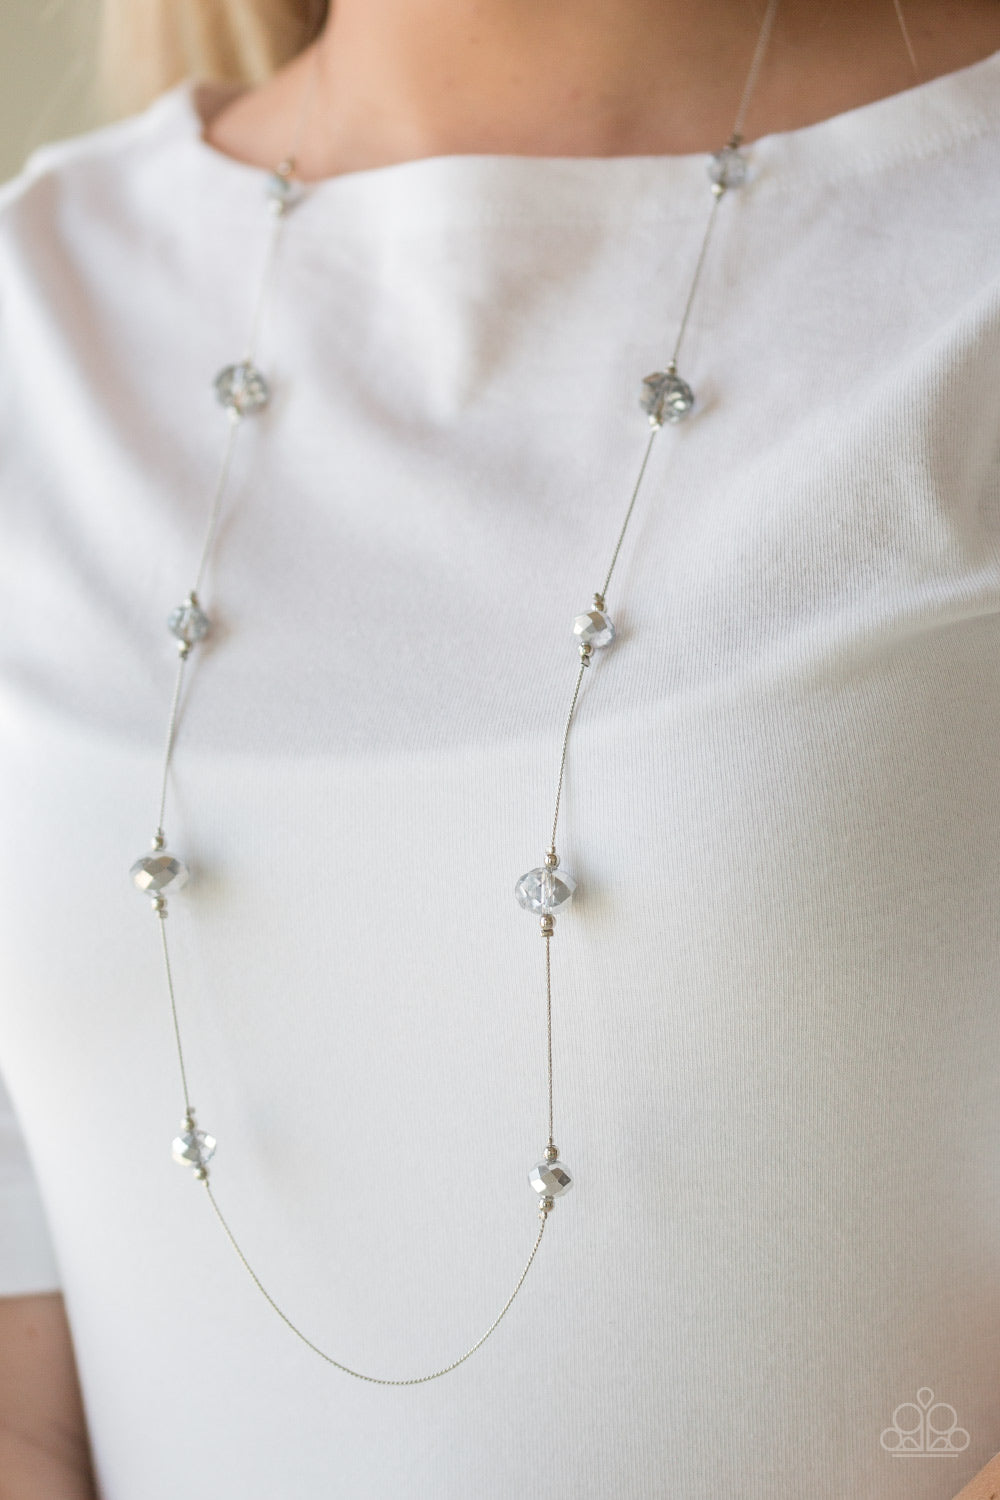 Champagne On The Rocks - Silver Necklace - Paparazzi Accessories - Infused with dainty silver accents, metallic and smoky crystal-like beads trickle along a dainty silver chain across the chest for a refined look. Features an adjustable clasp closure fashion necklace.